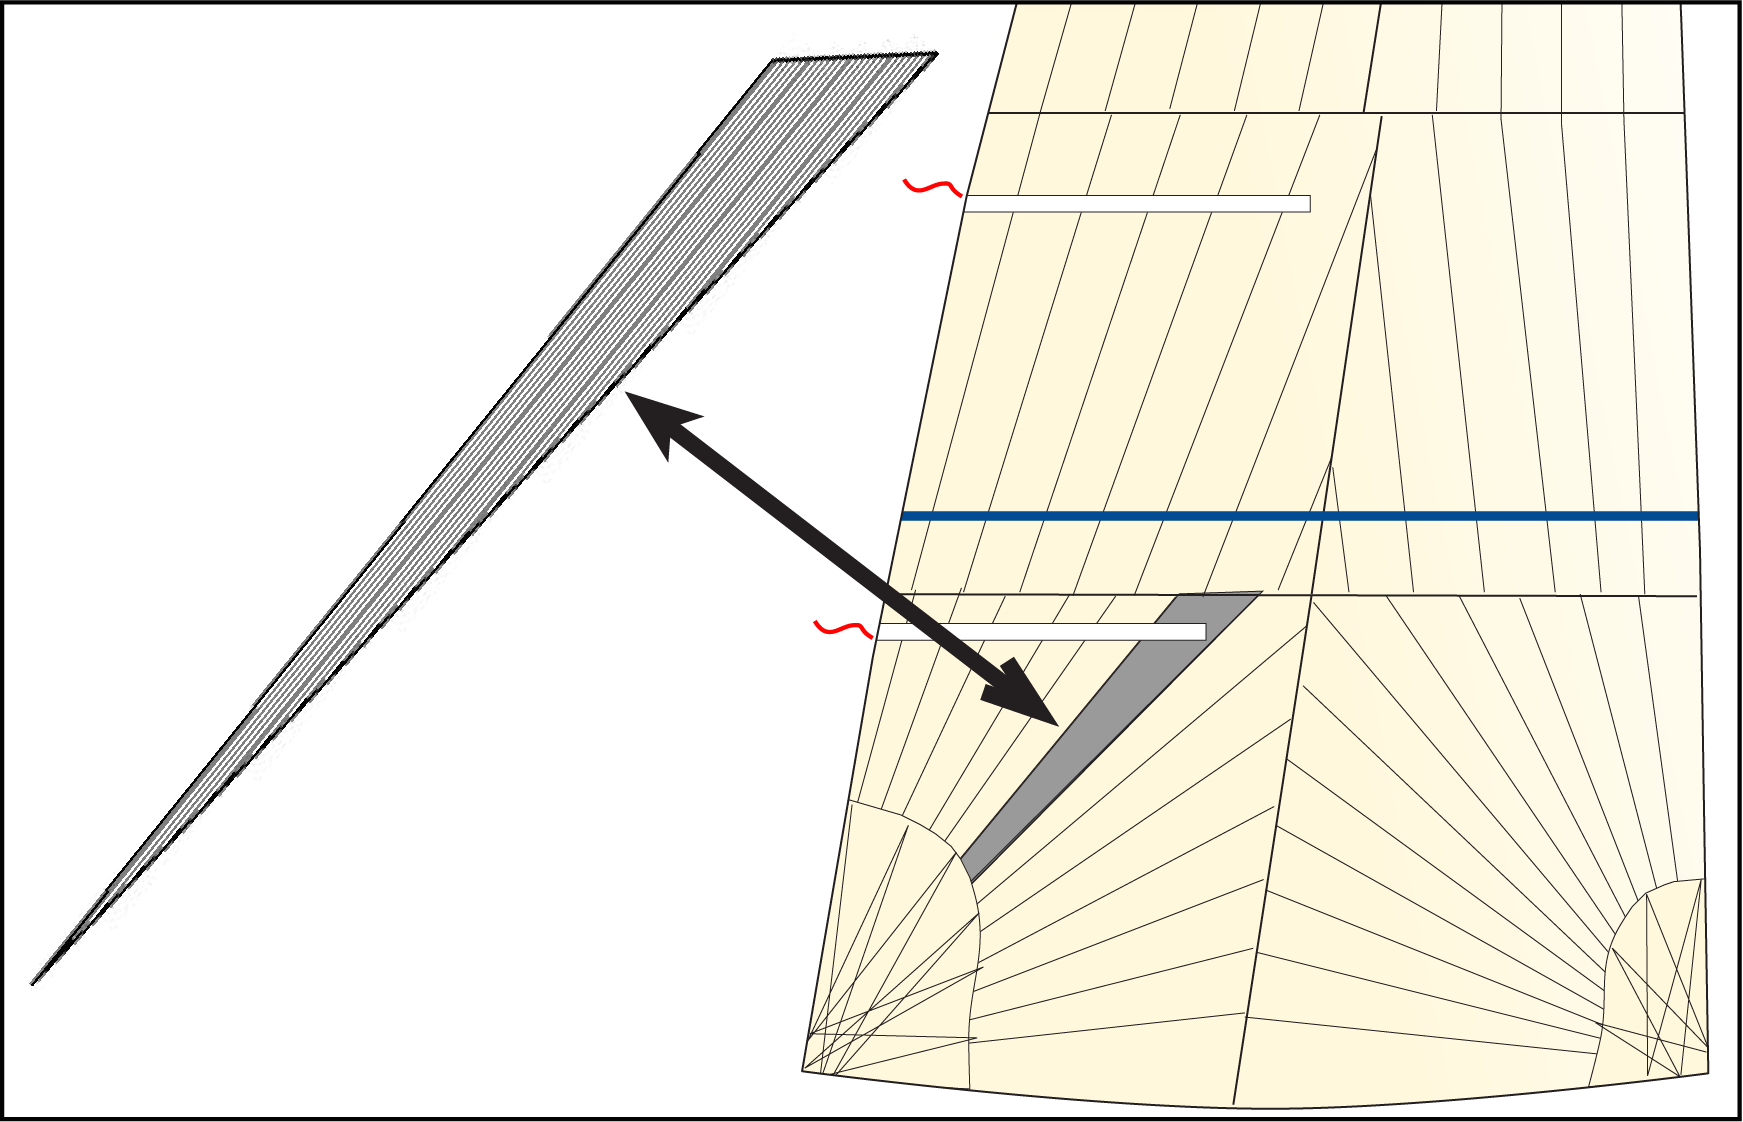 Above: That same gore in the clew section of a mainsail showing the alignment of the warp yarns.